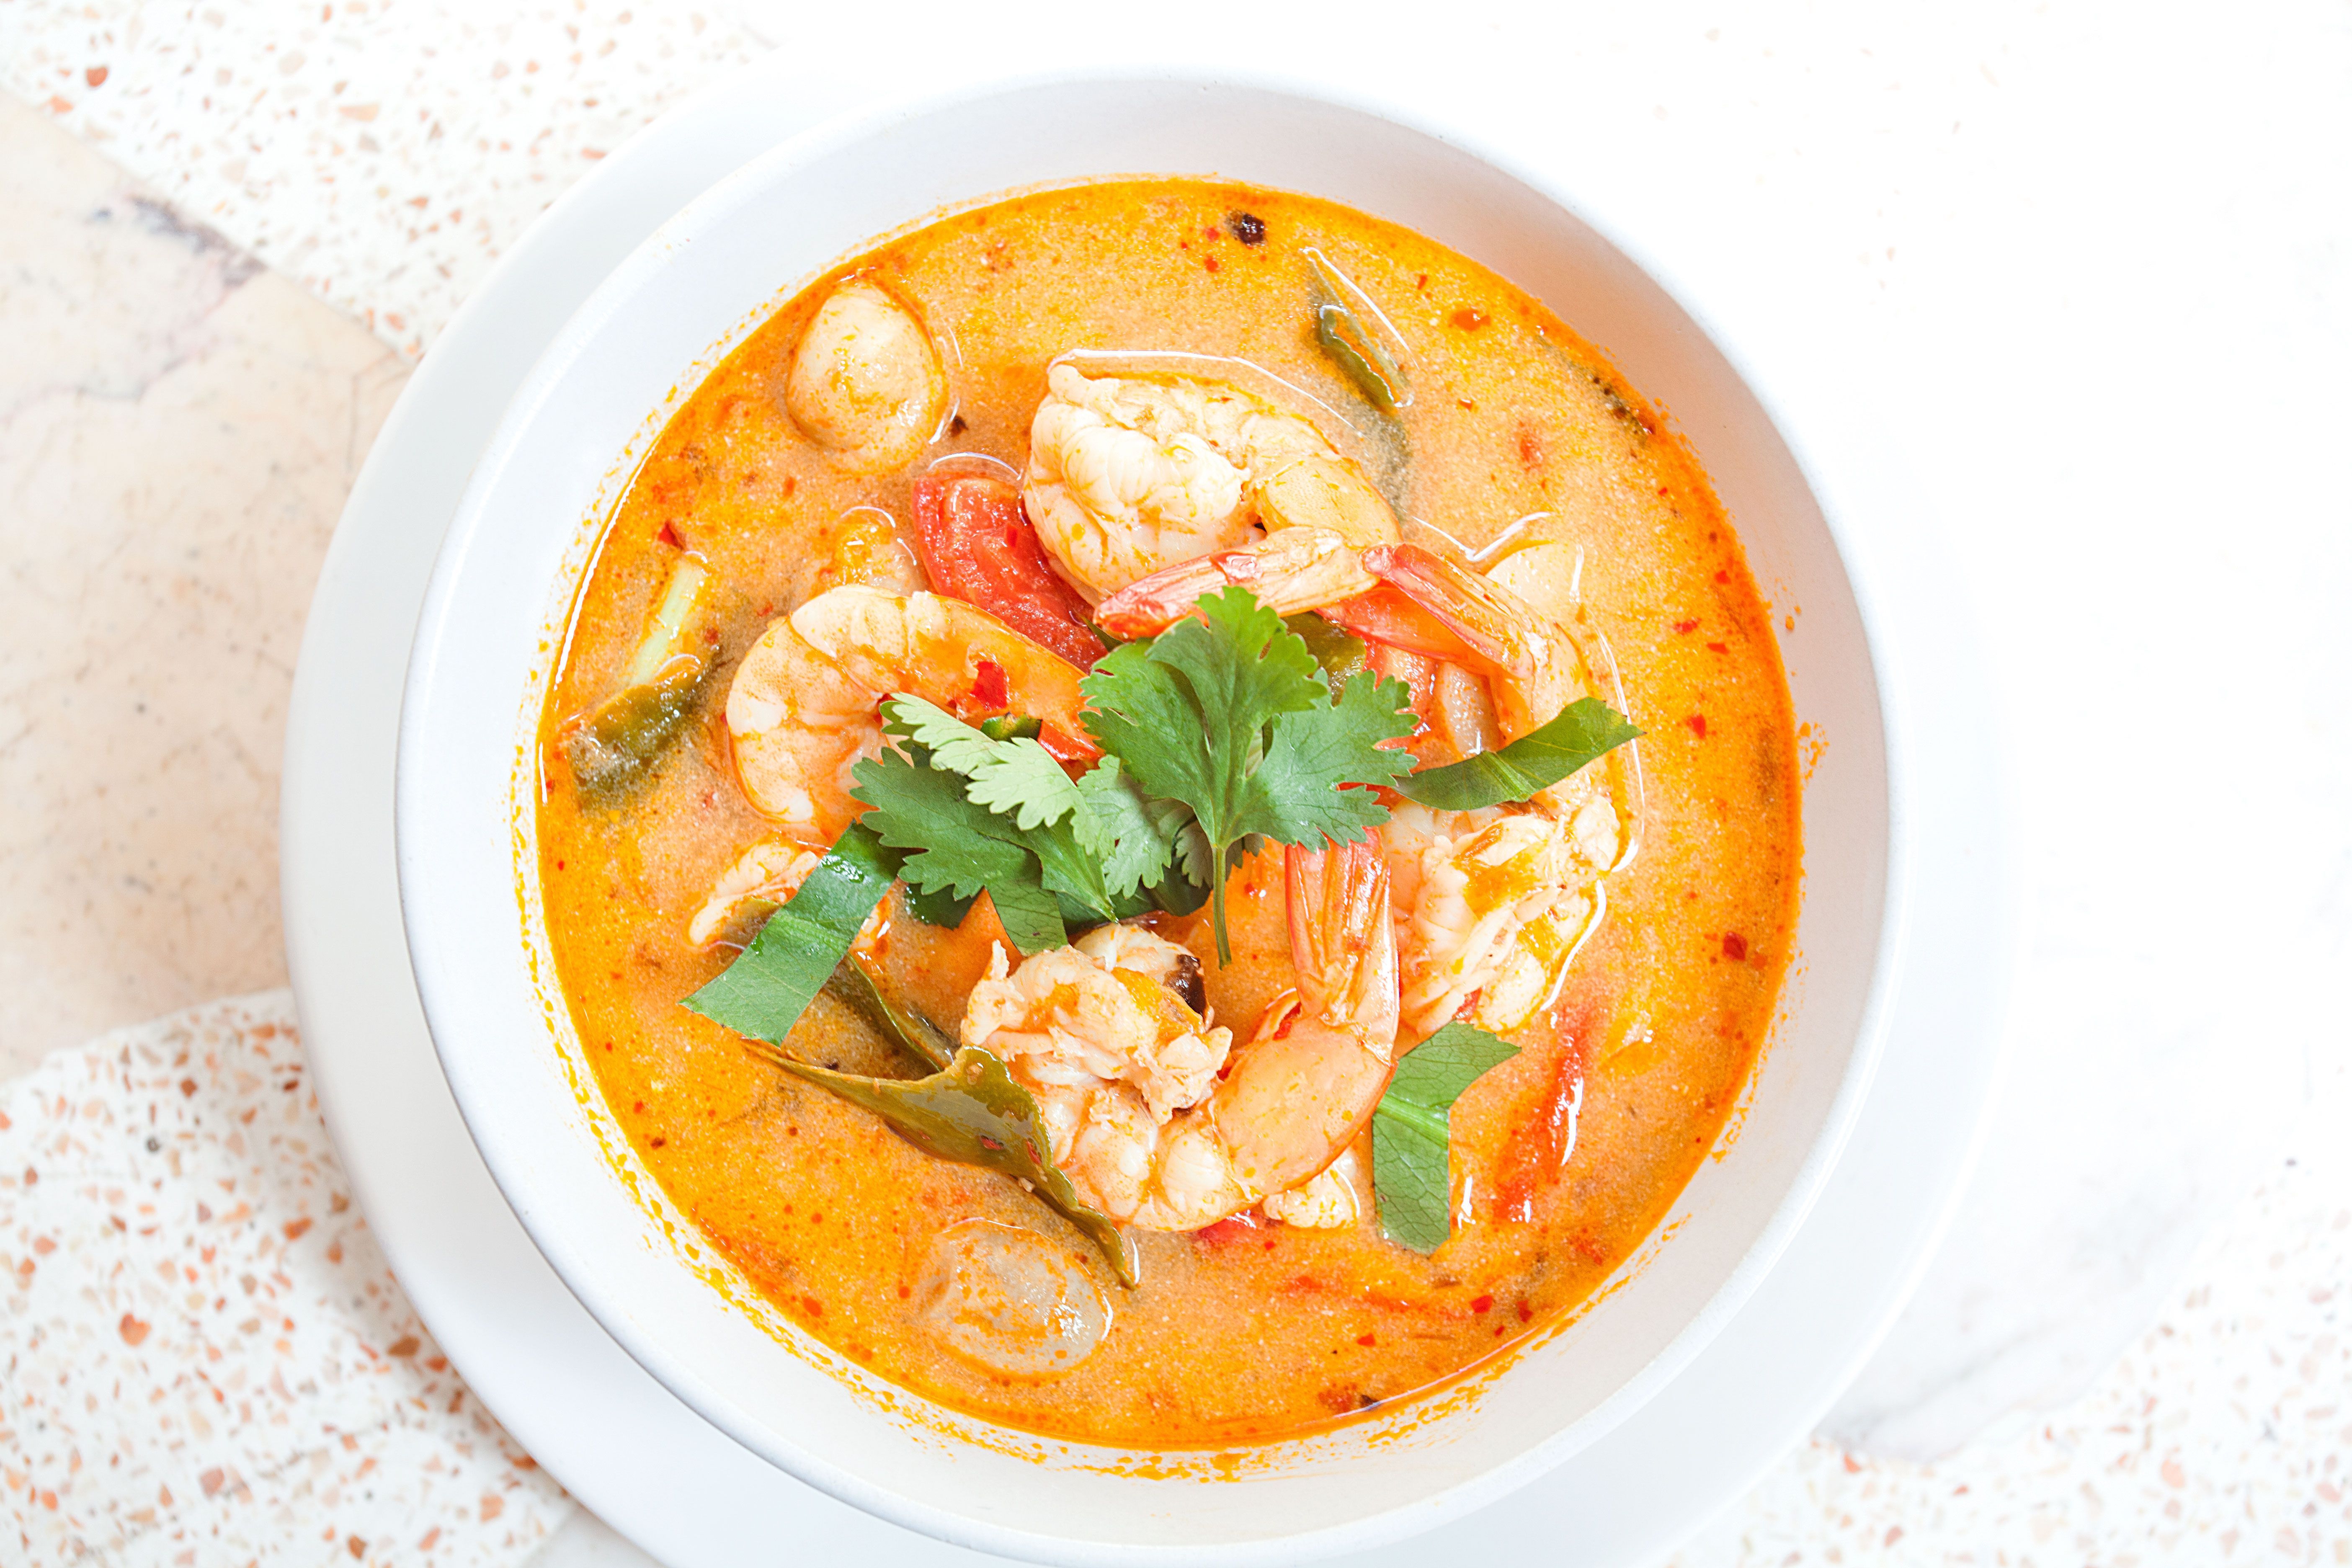 Tom Yum Goong Spicy Prawn Soup Recipe And Cooking Method - Riset